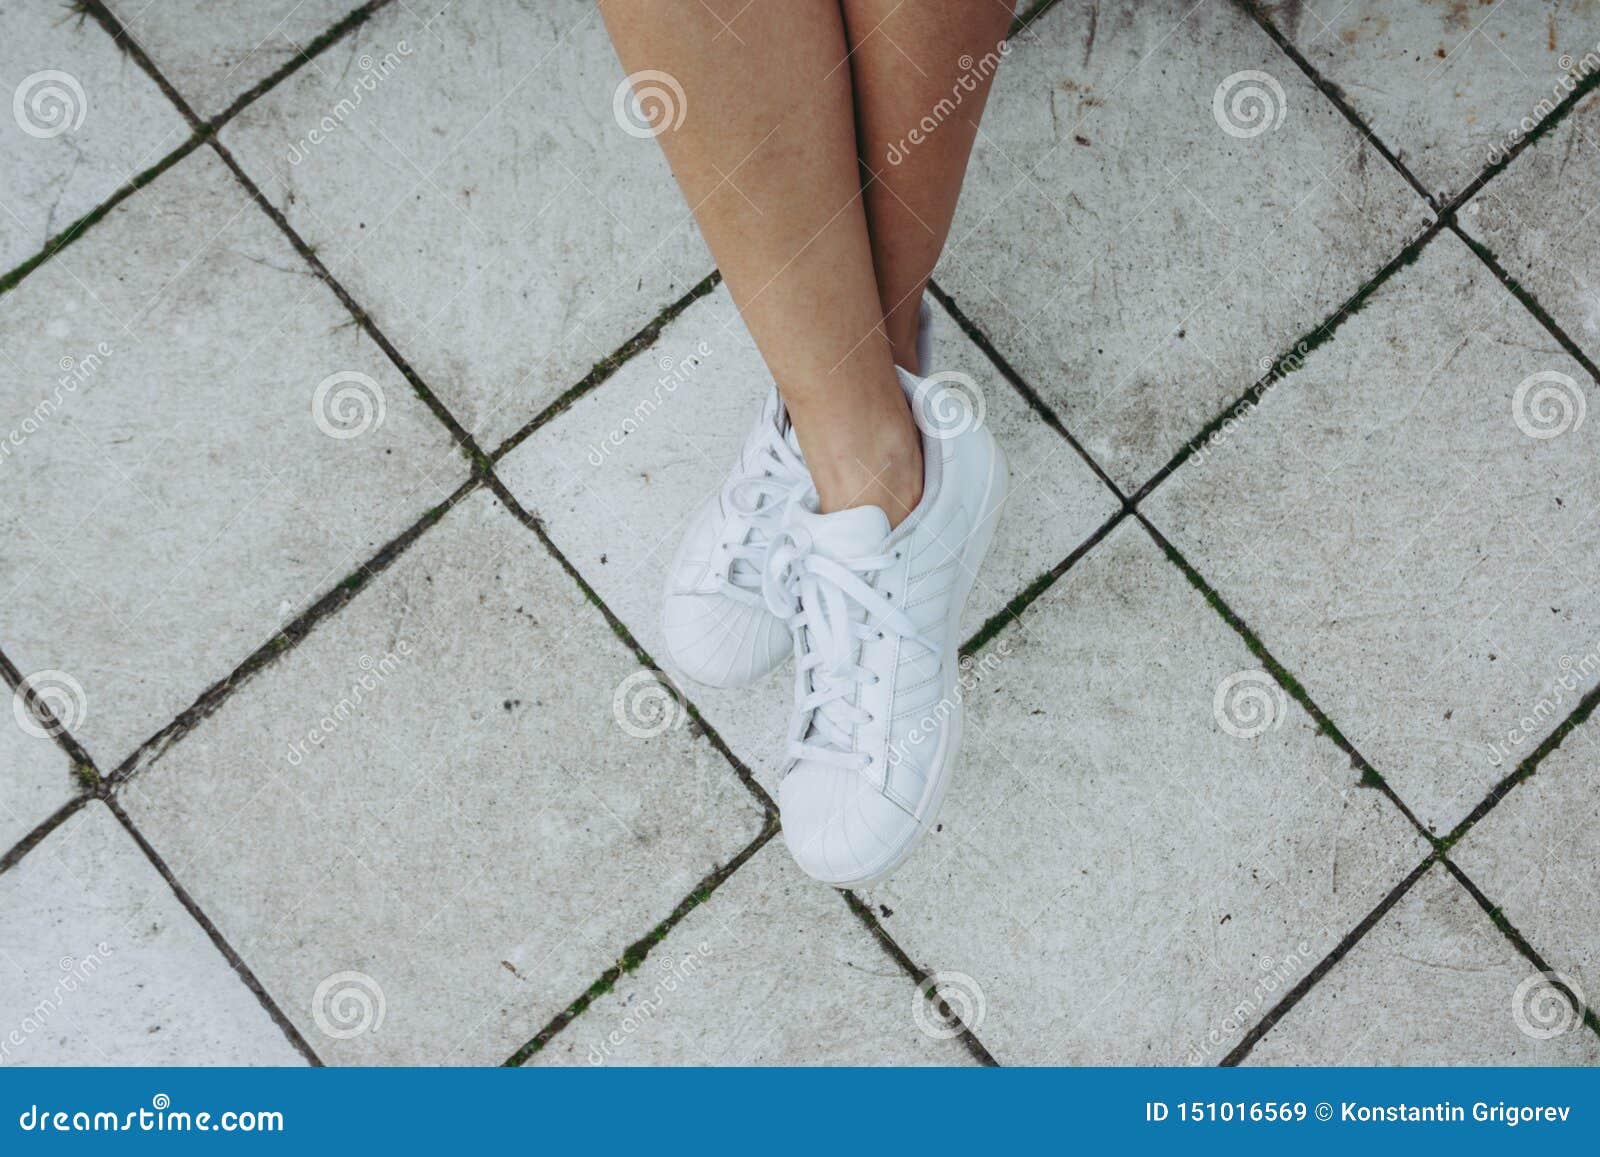 Legs of a Girl in White Sneakers on a Gray Tile Stock Image - Image of ...